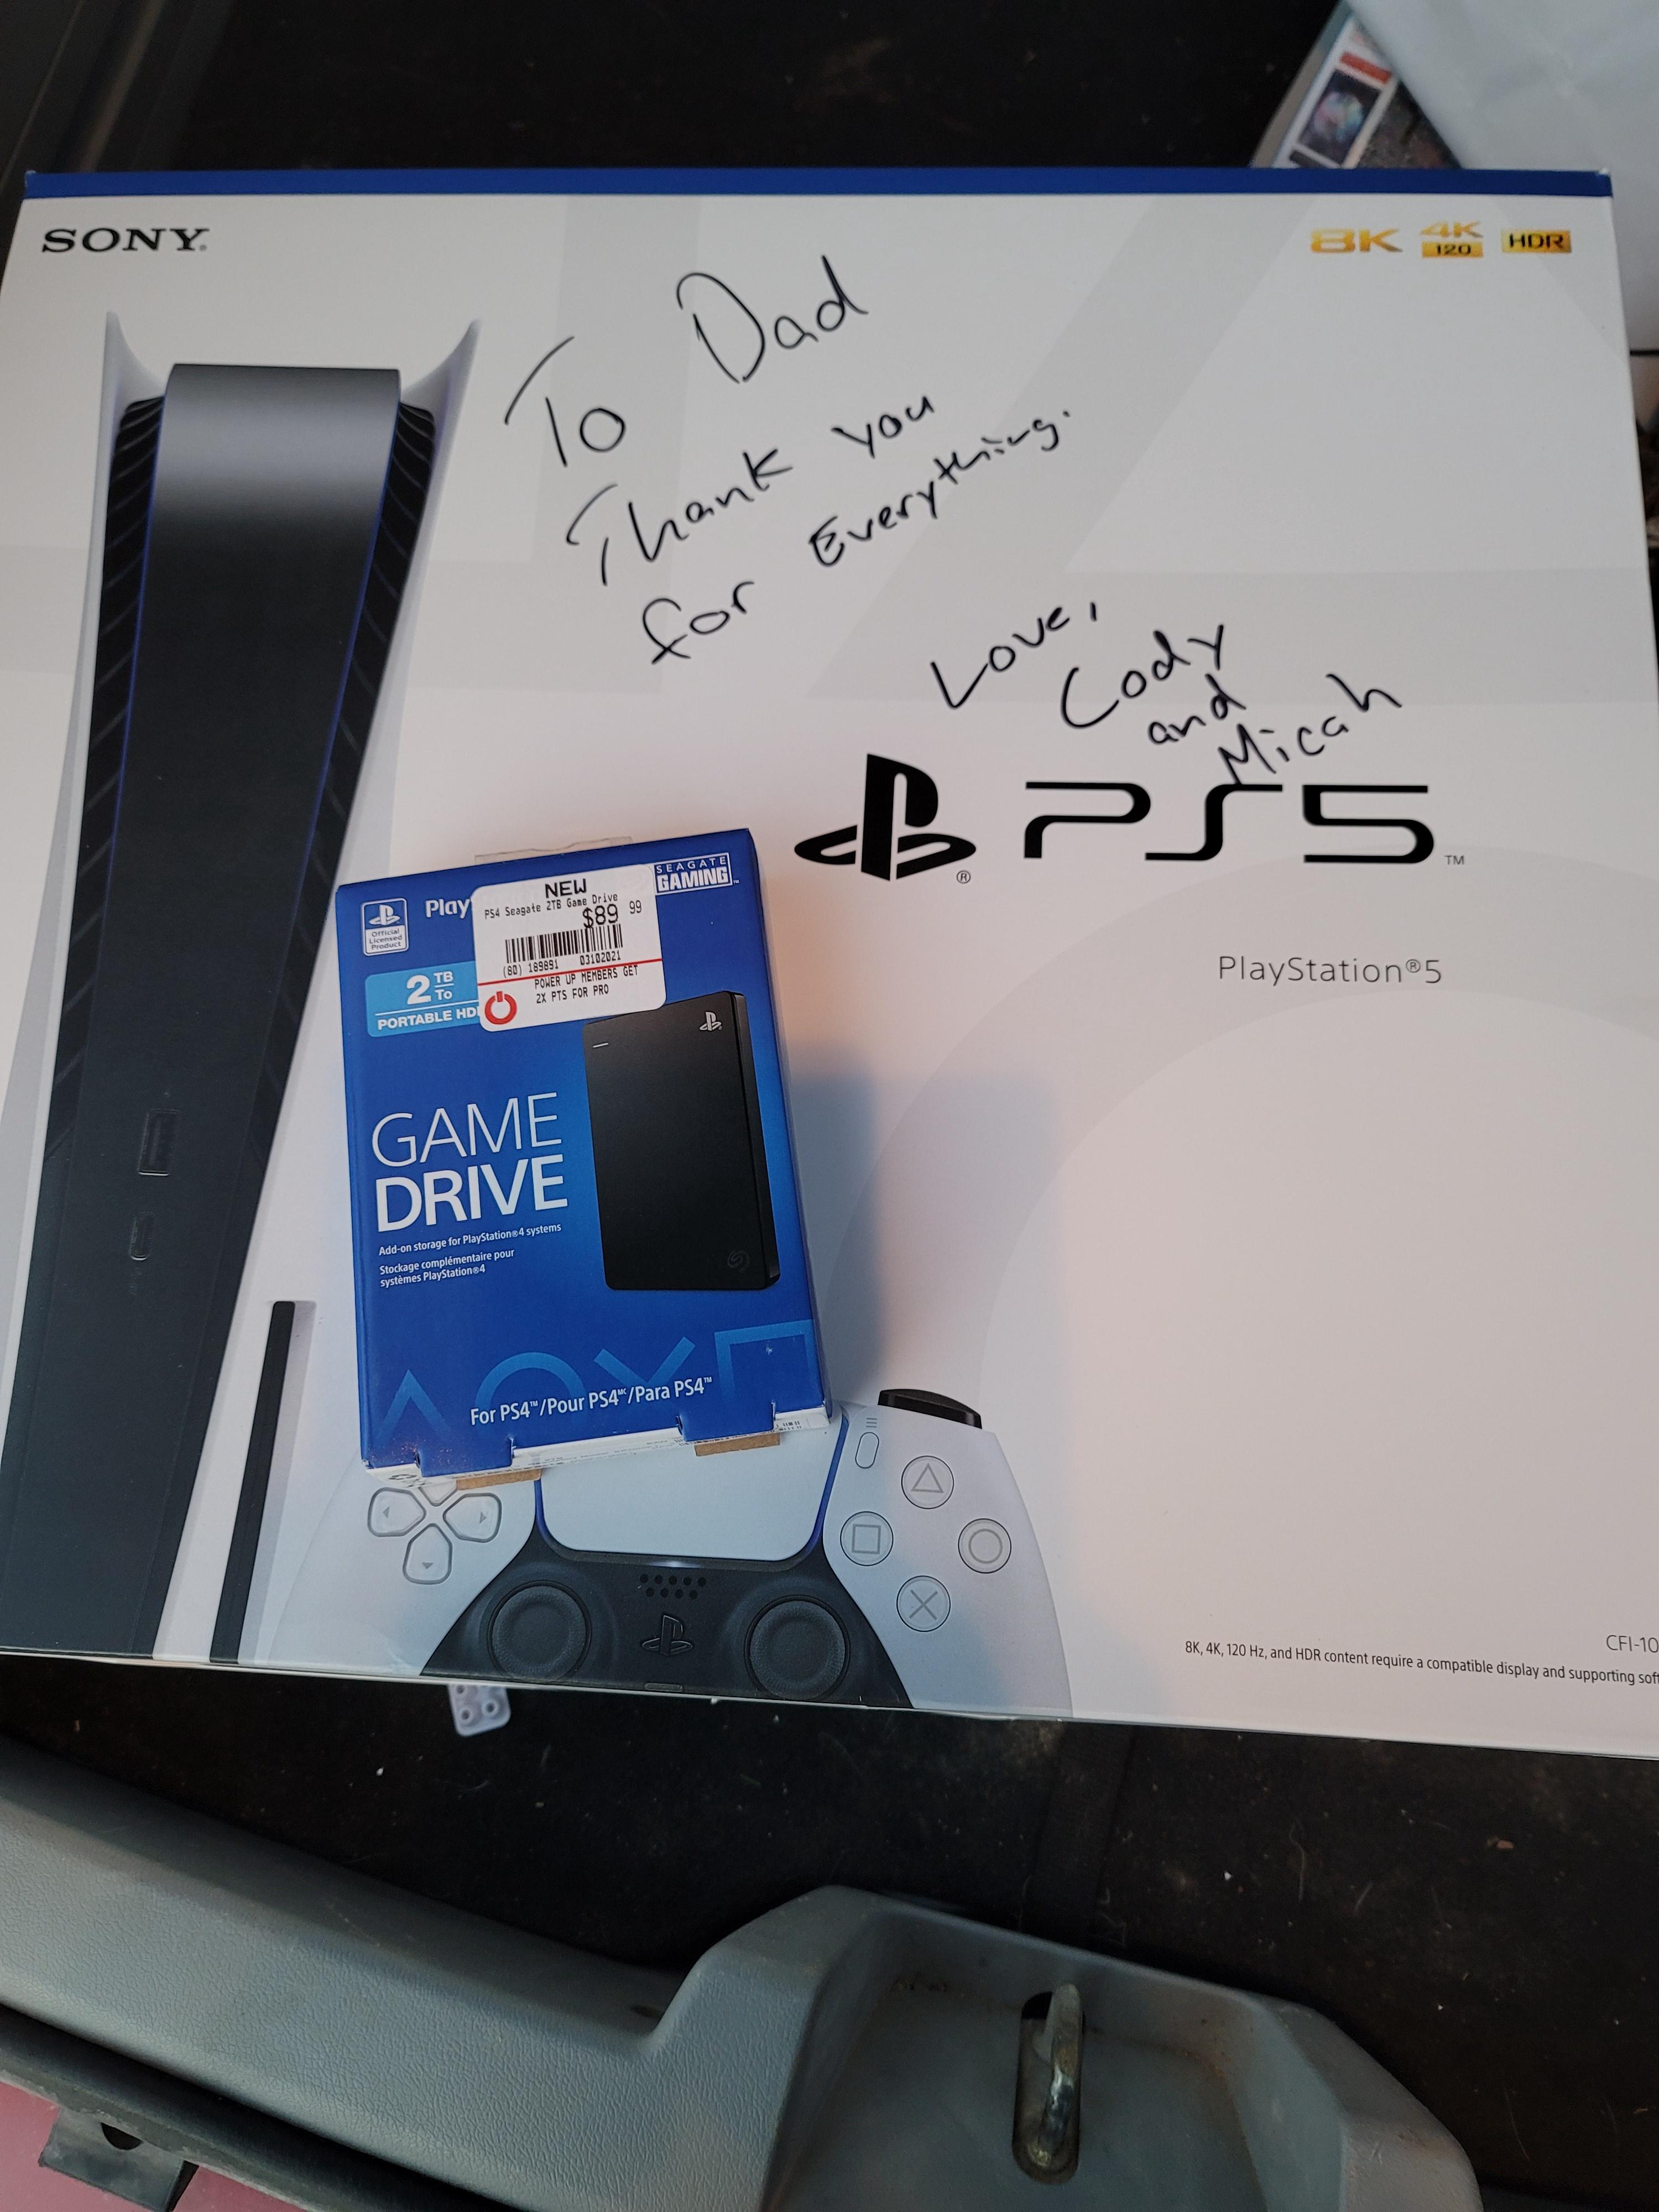 funny gaming memes - electronics - Sony To Dad Thank you for Everything Love, Cody Micah and Bps PlayStation Game Drive